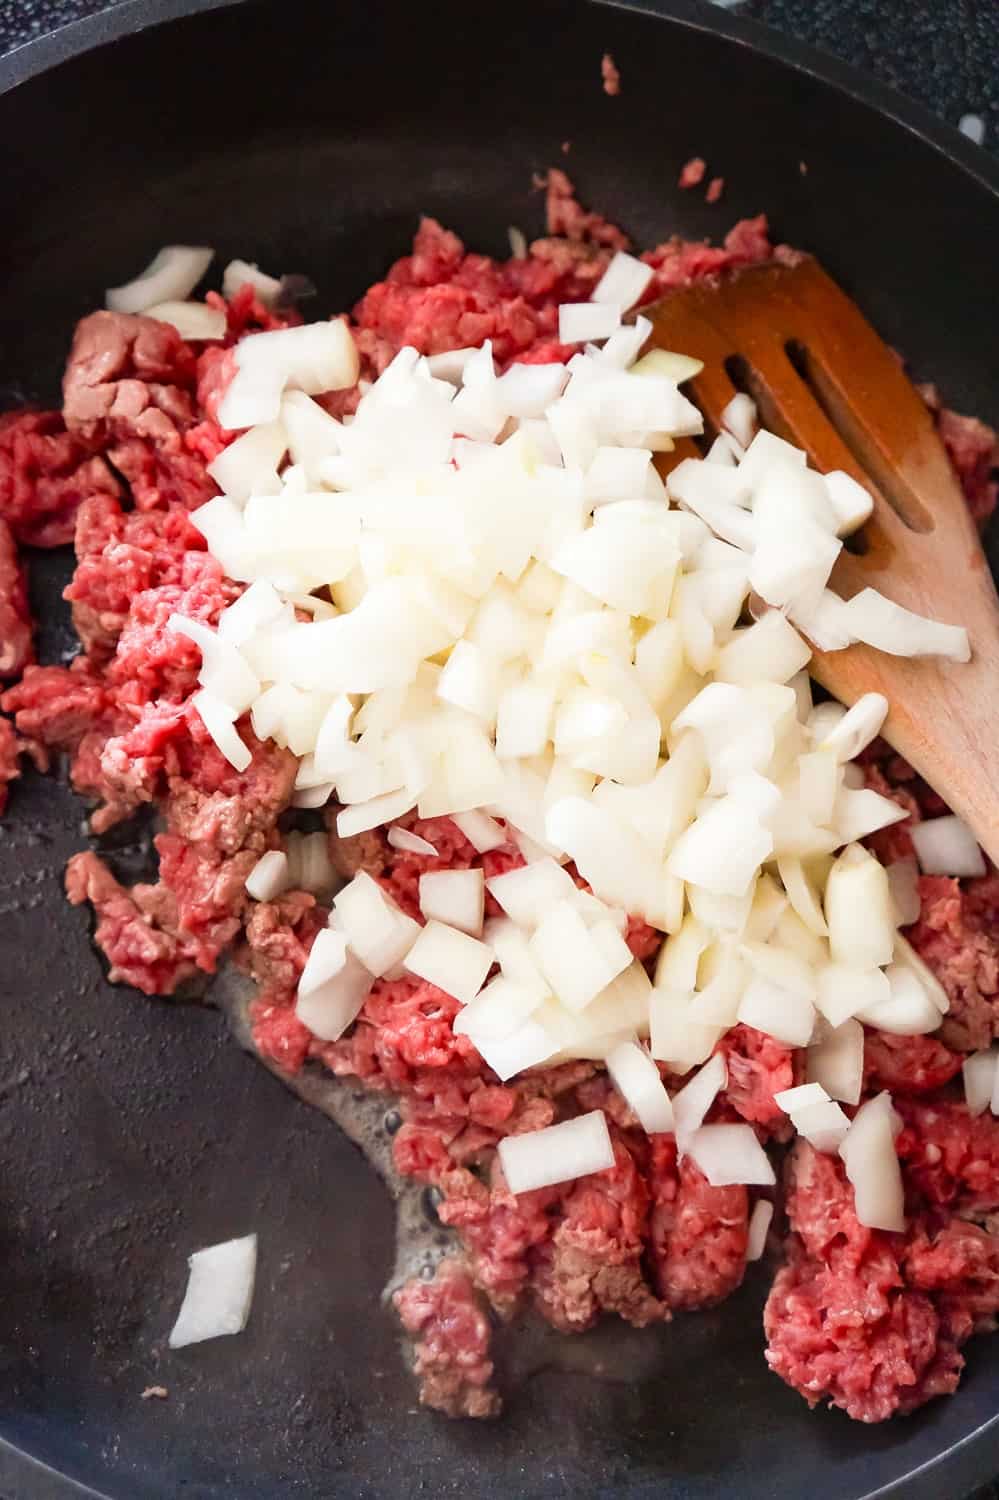 diced onions on top of raw ground beef in a frying pan